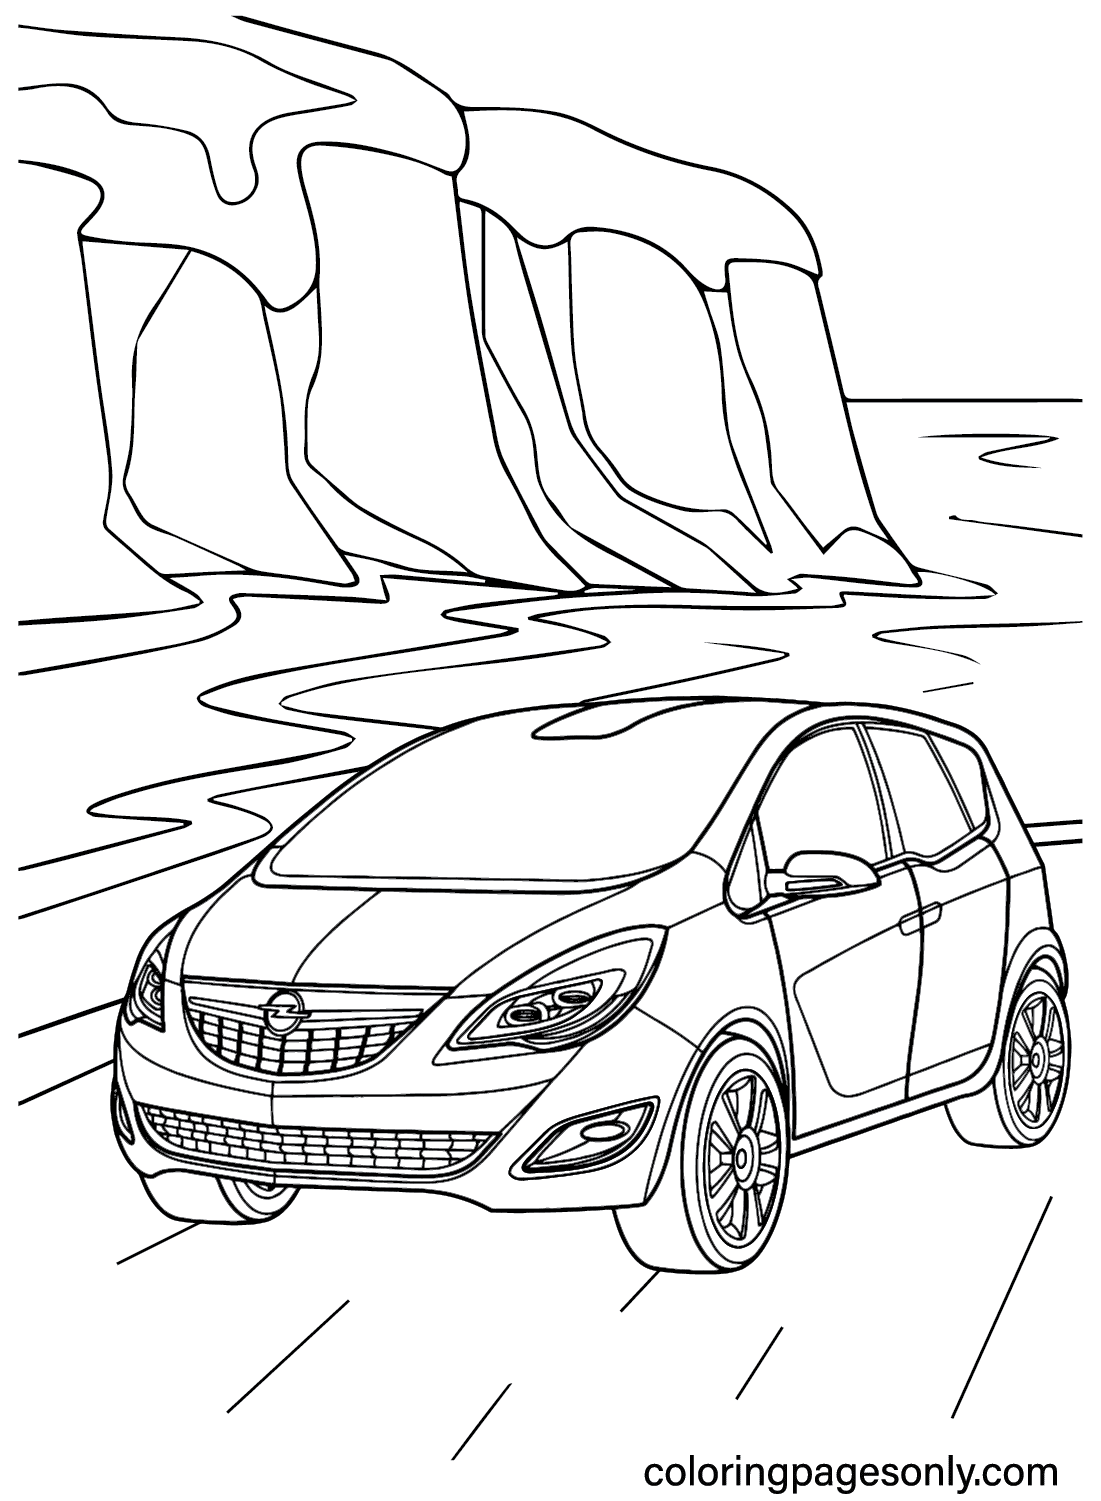 Opel Meriva Coloring Page from Opel